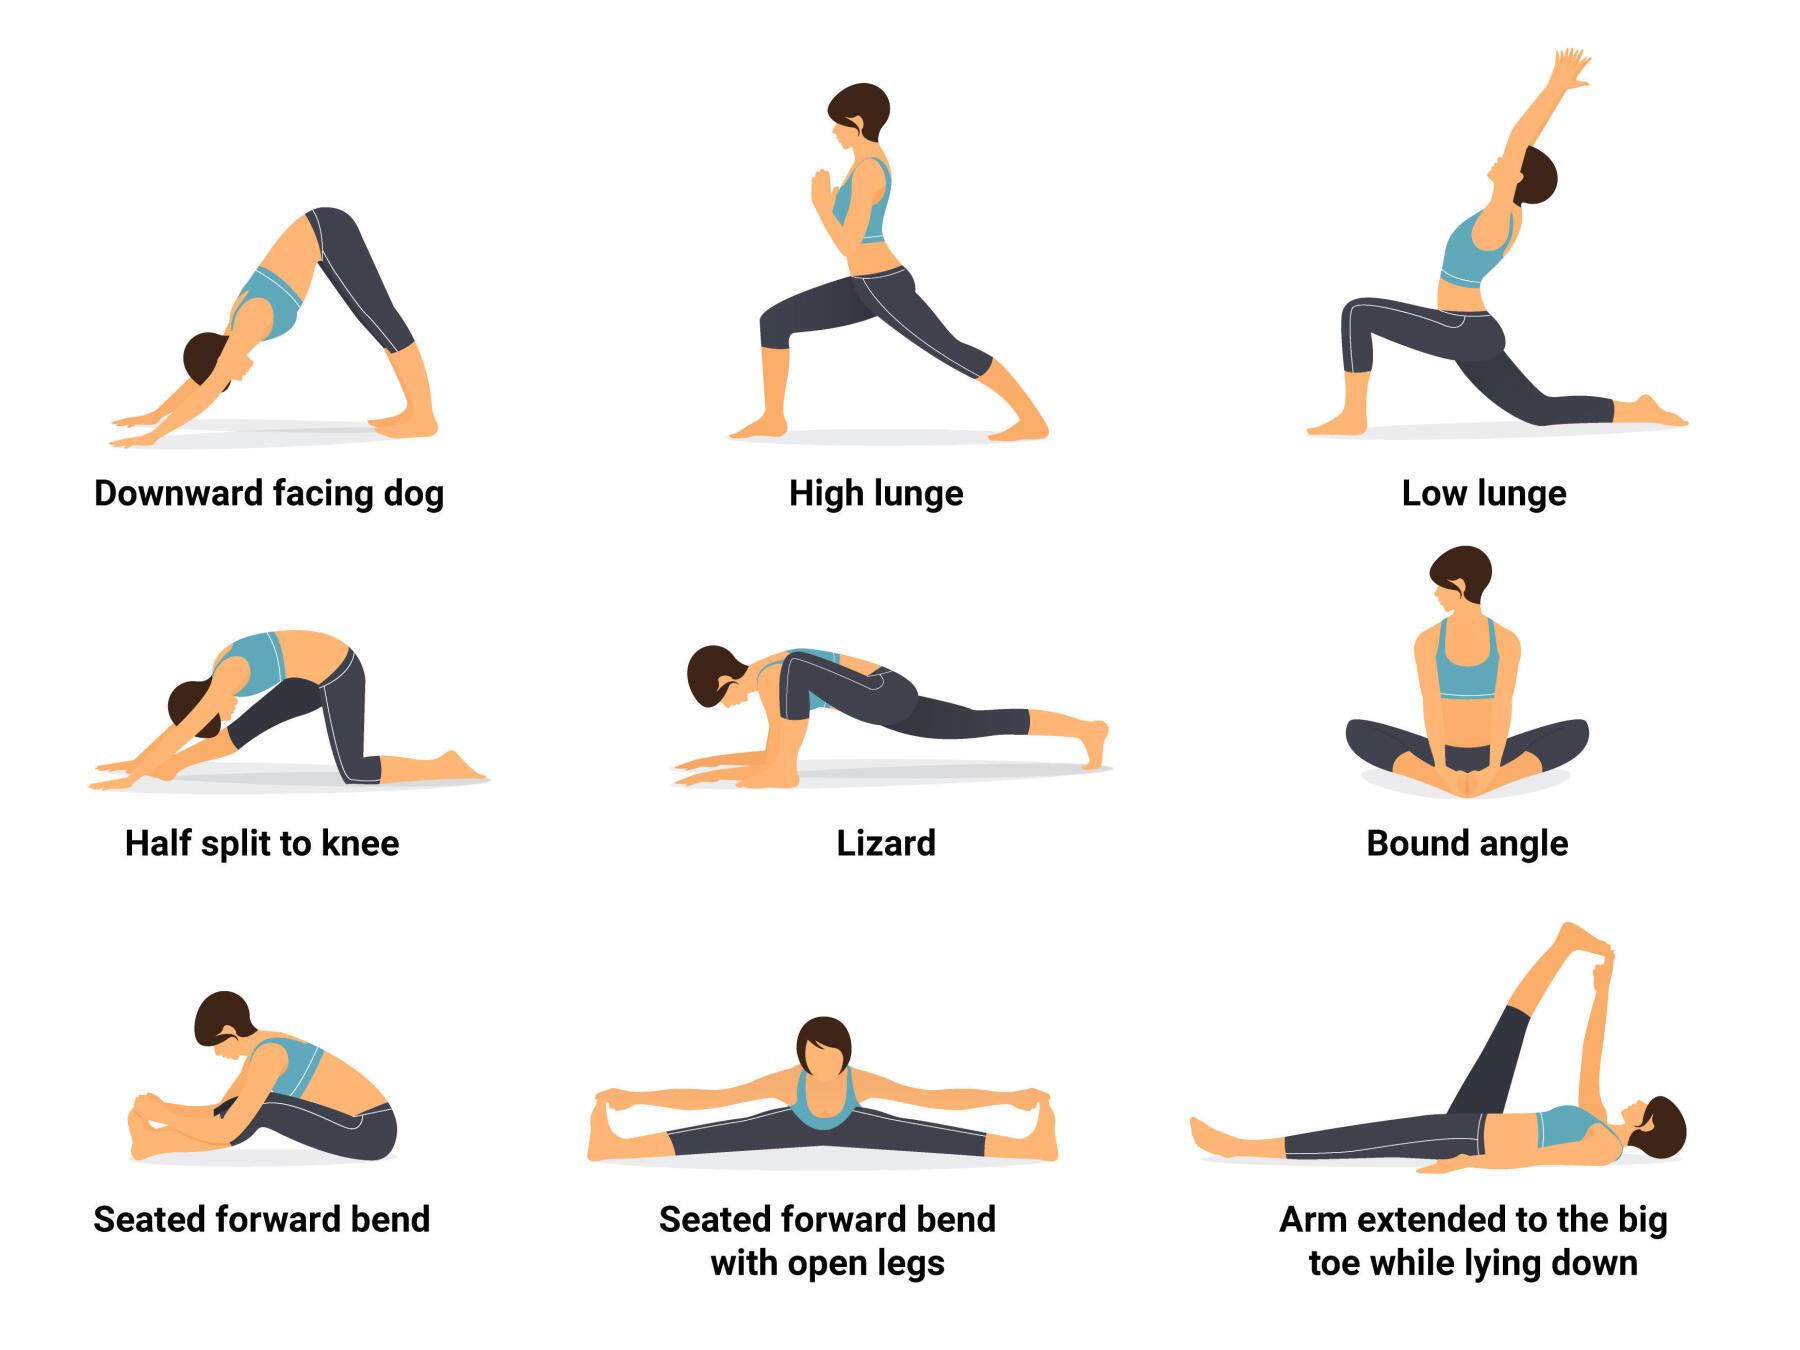 6 yoga poses that help with mobility for runners - The Manual